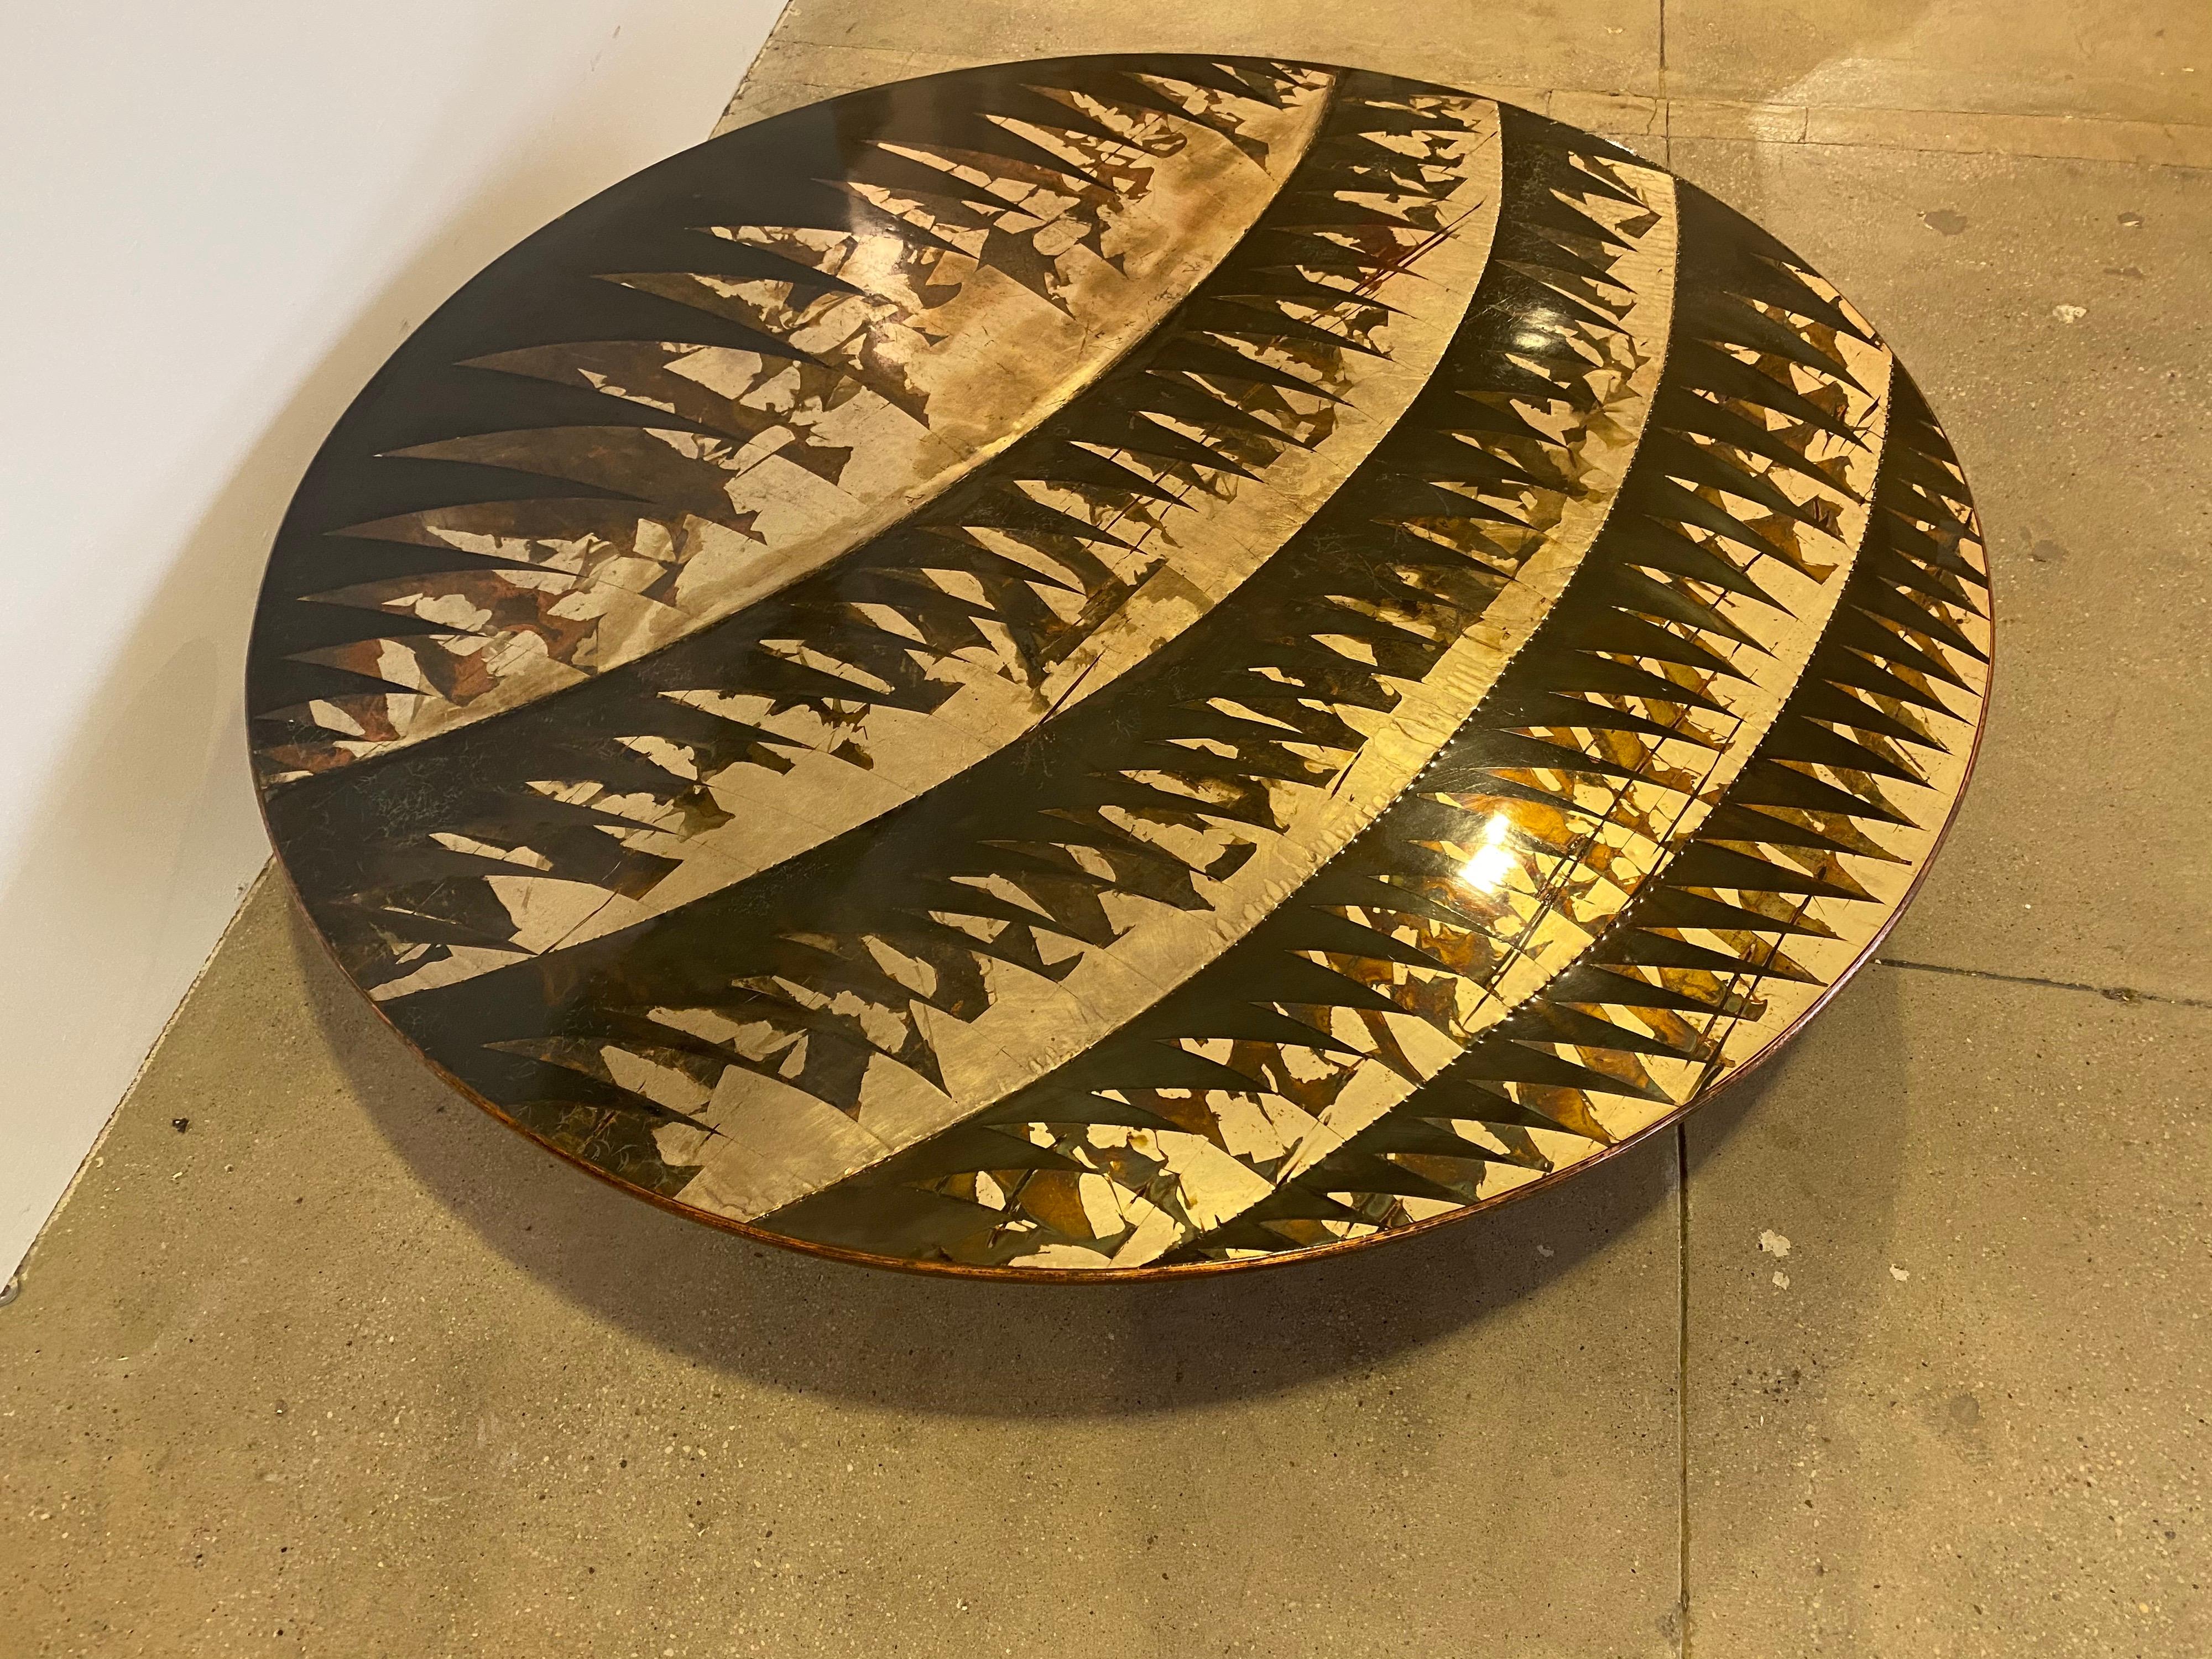 A large 58” wide round sculptural handcrafted silver and bronze coffee table by famed Italian artist, Lorenzo Burchiellardo. Signed, circa 1972. The table is composed or etched and patinated decorated stripes of silver and bronze. The table is in